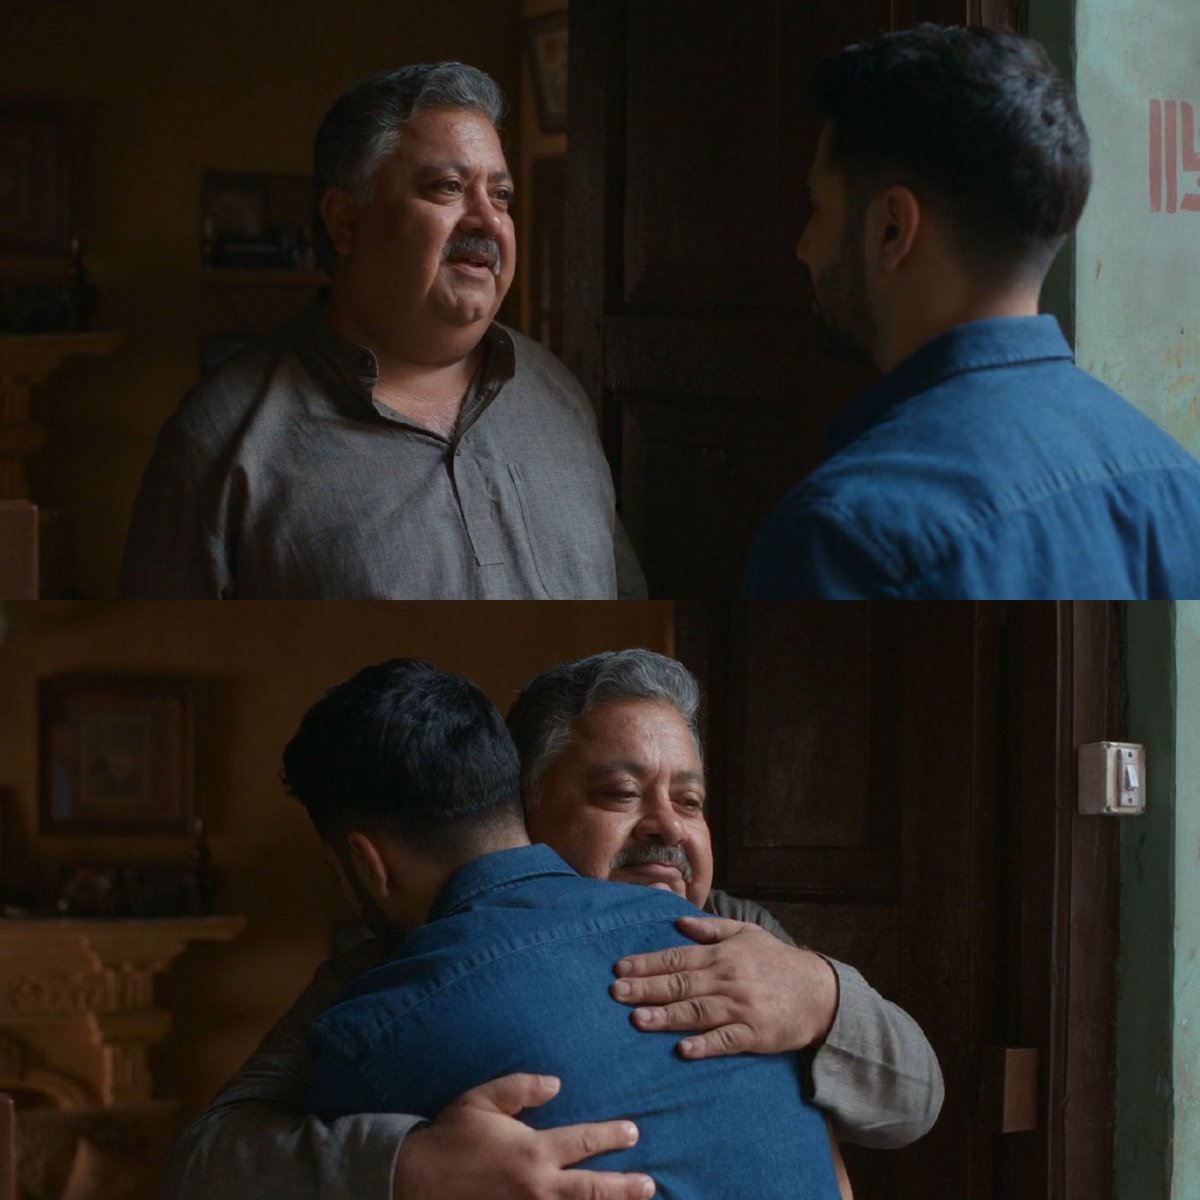 I don't know if director @niteshtiwari22 wanted to convey this but there are so many things in #Bawaal that come around full circle in a positive way
Scene 1 :
Pic 1 - Aa gaye Ajju bhaiyaa 
Pic 2 - Aa gaye Ajju bhaiyaa 
Same dailogue different emotions 😍 
@Varun_dvn #manojpahwa